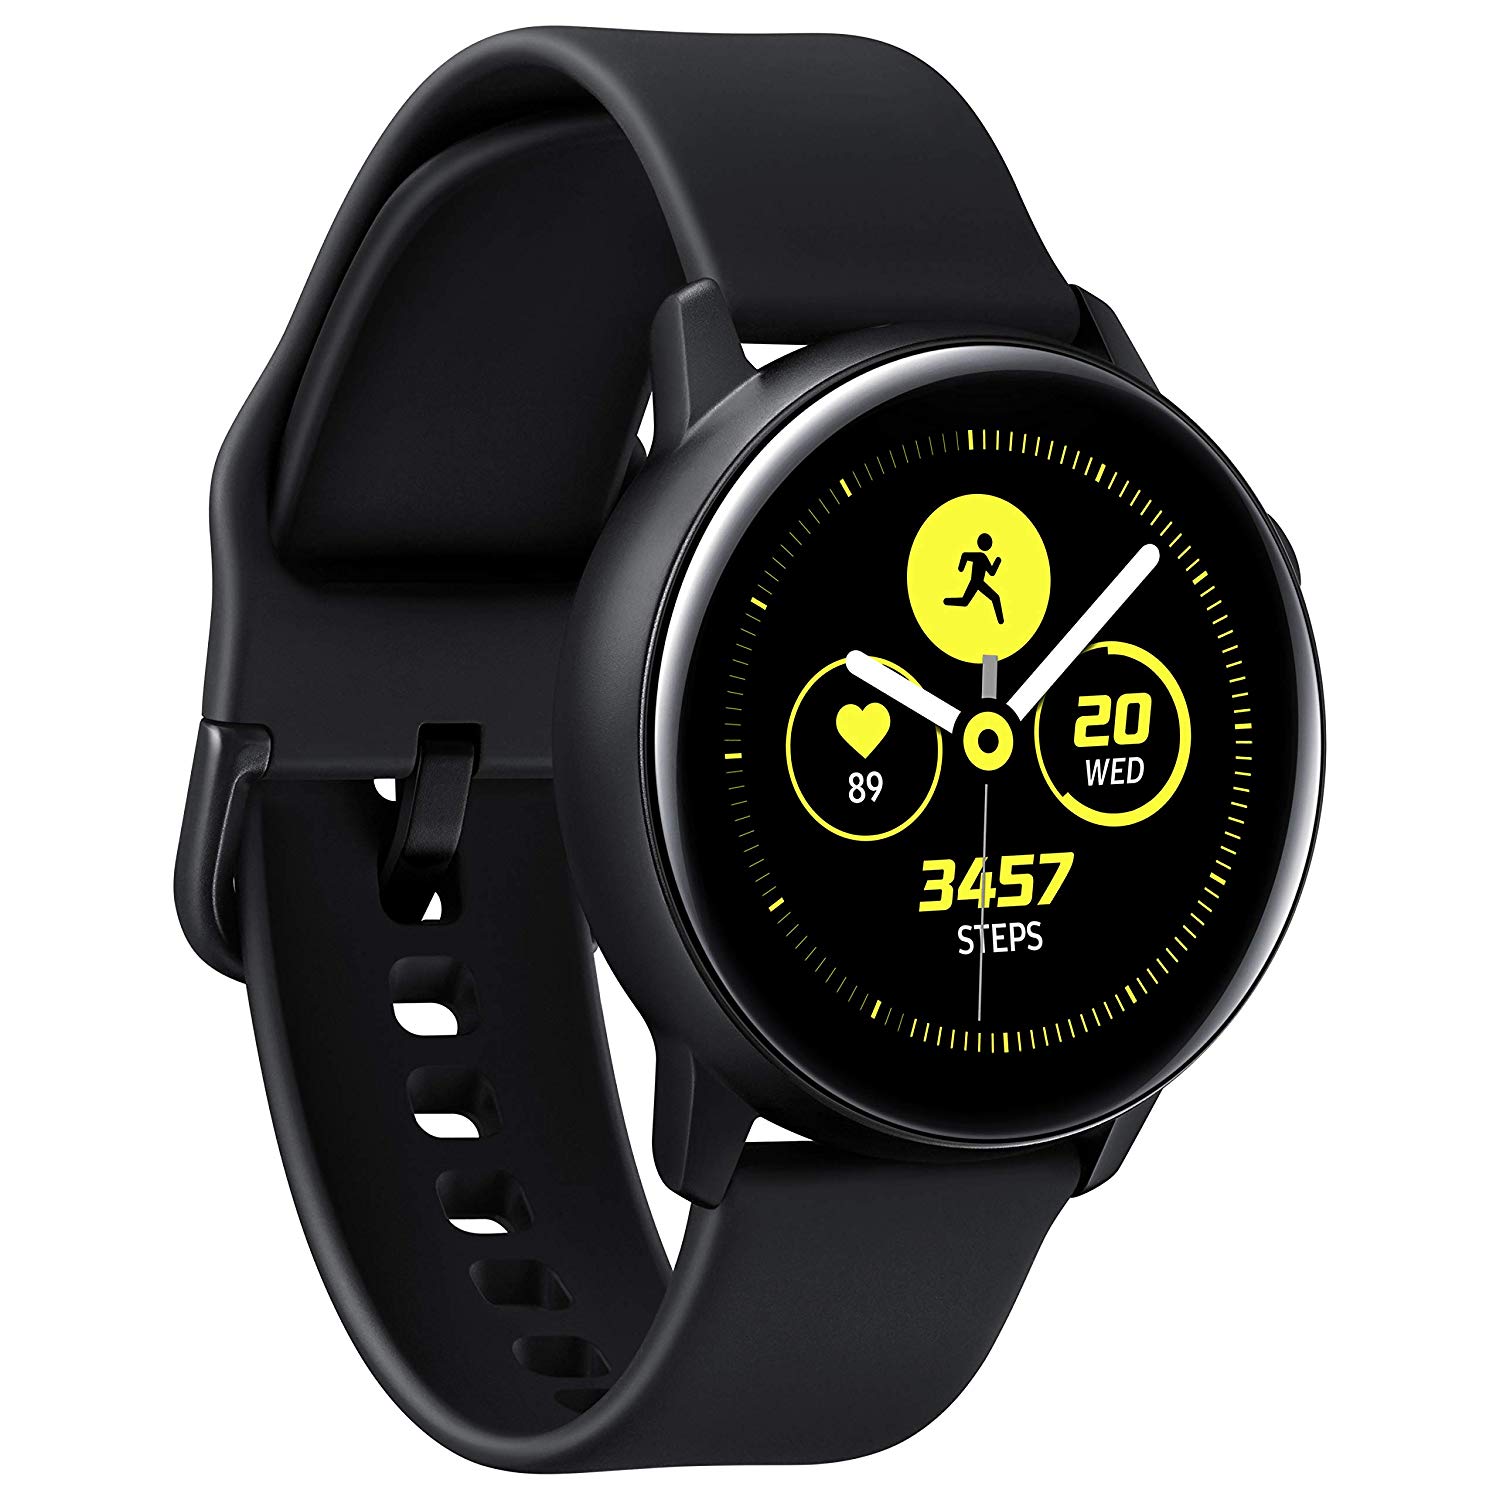 REVIEW: Samsung Galaxy Watch Active | The Test Pit